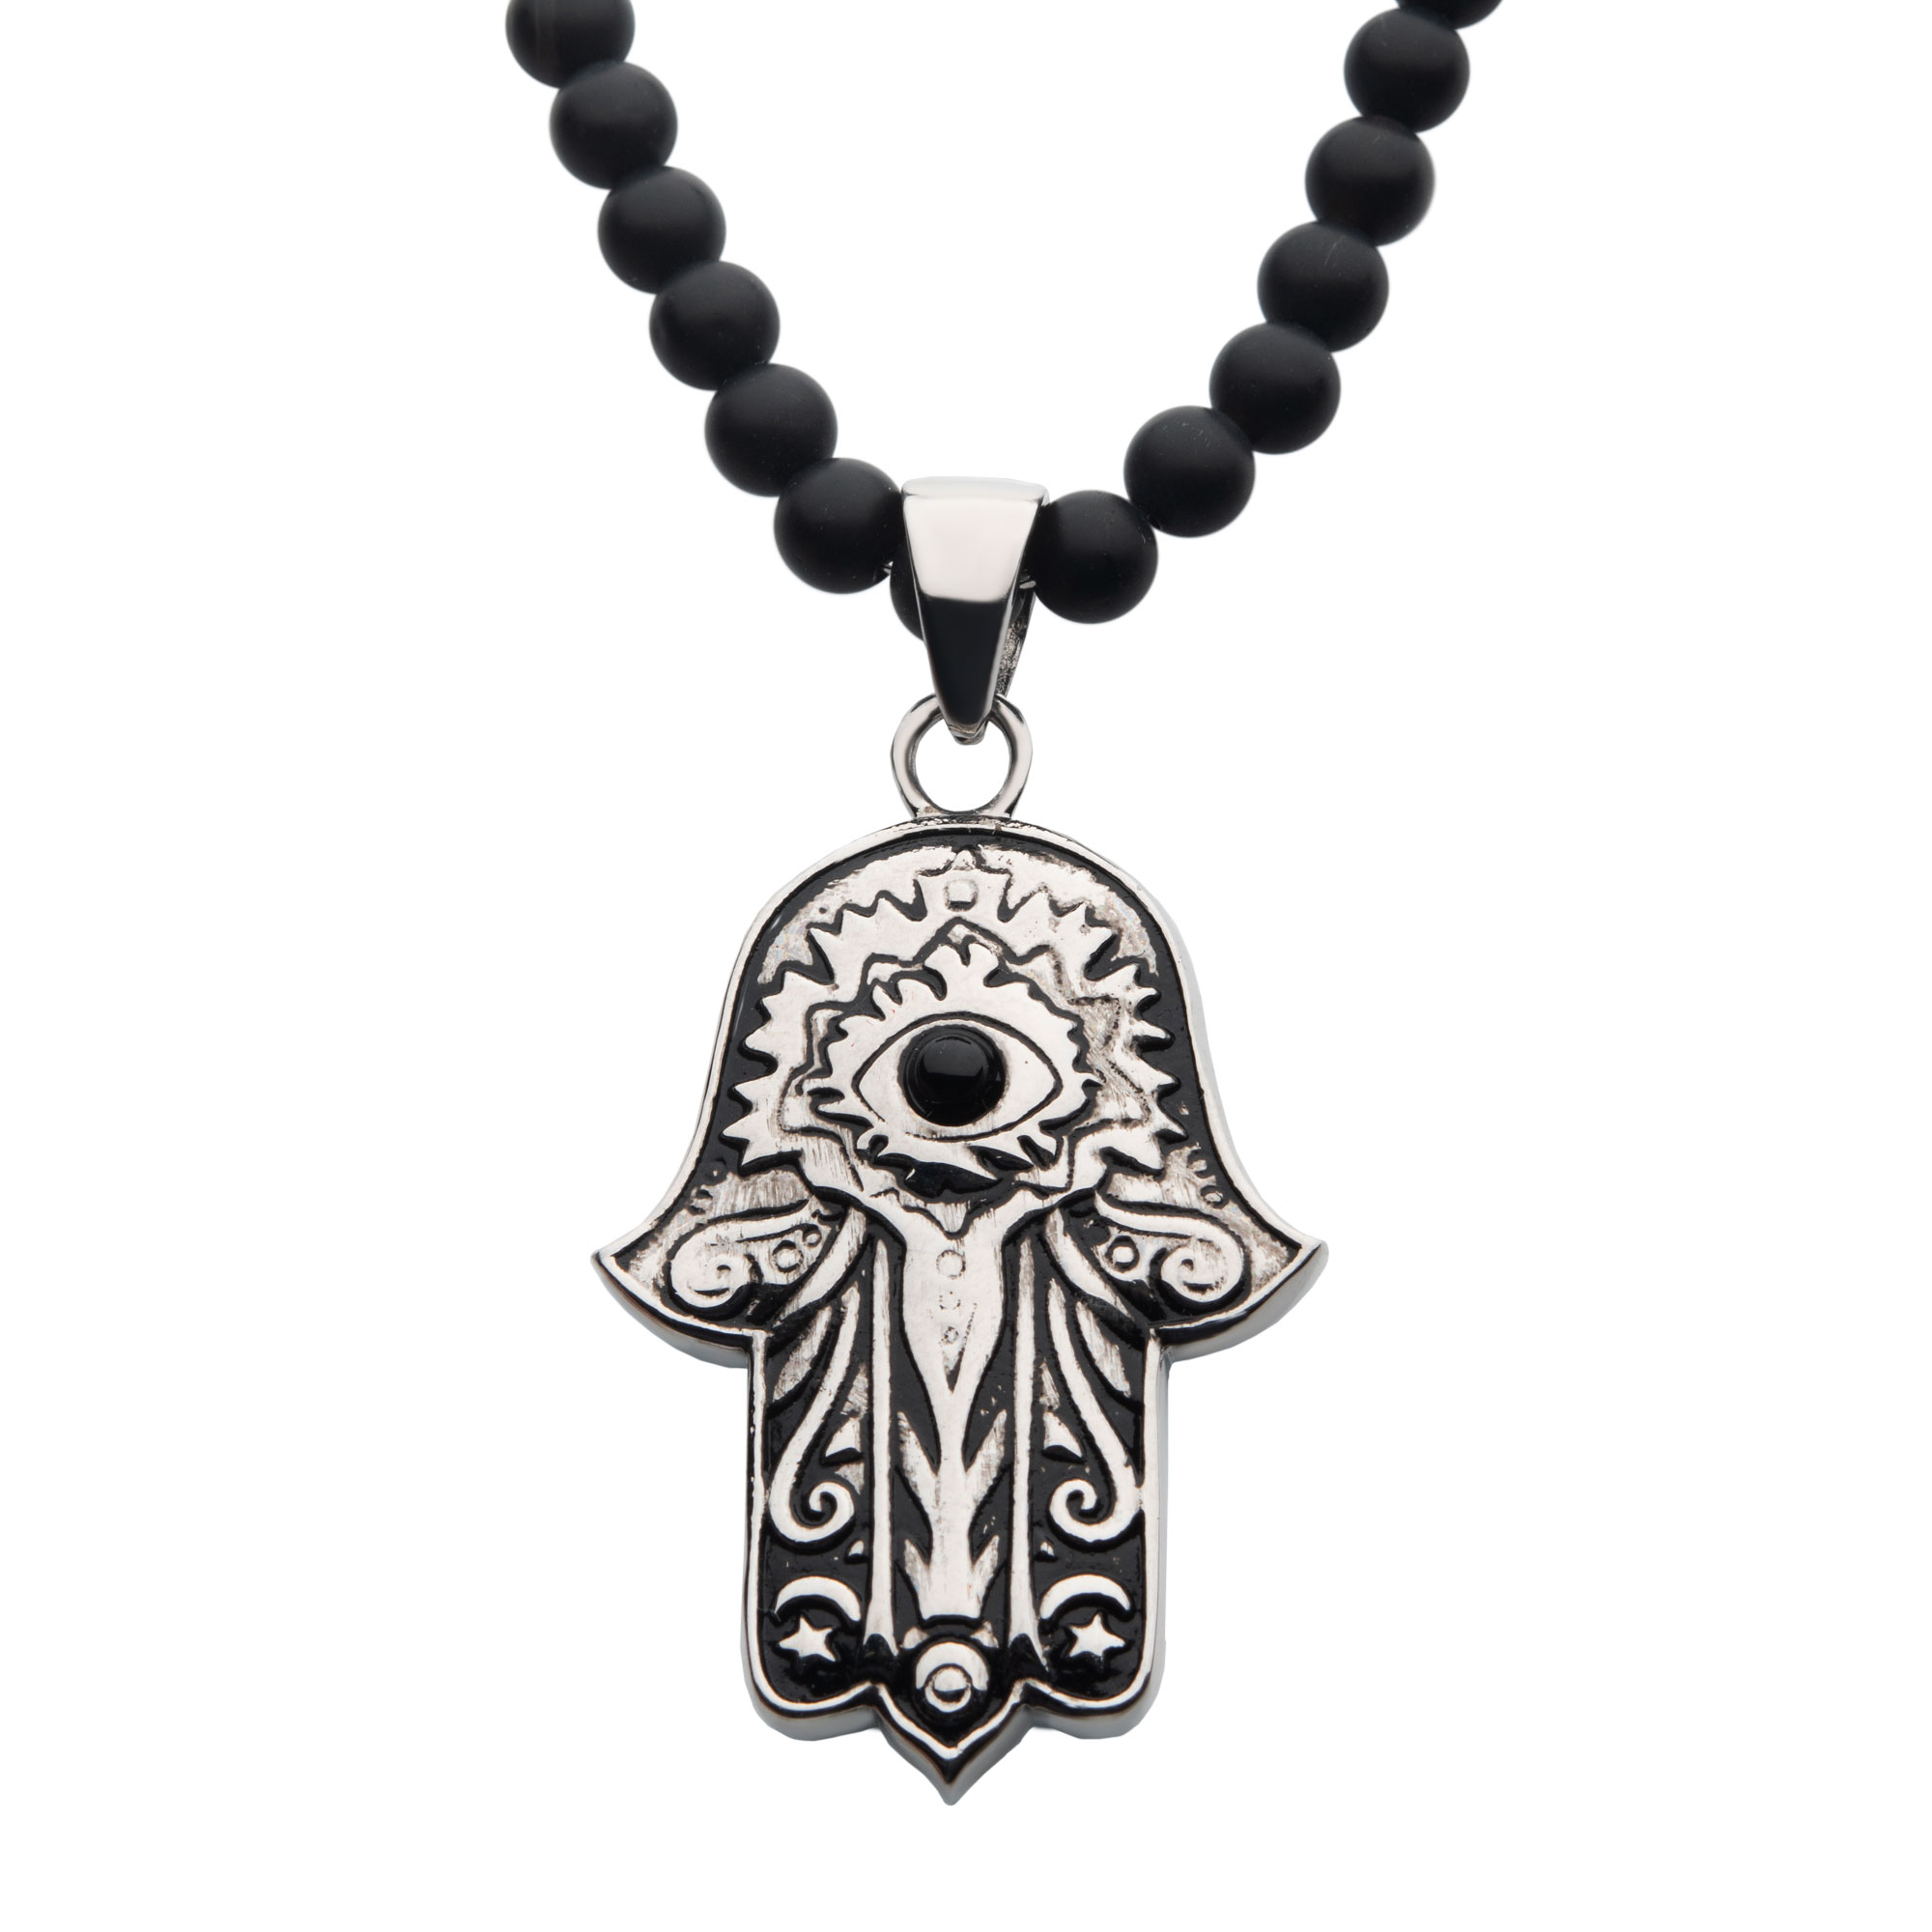 Stainless Steel with Centerpiece Black Agate Stone Hamsa Pendant, with Black Agate Stone Bead Necklace Thurber's Fine Jewelry Wadsworth, OH